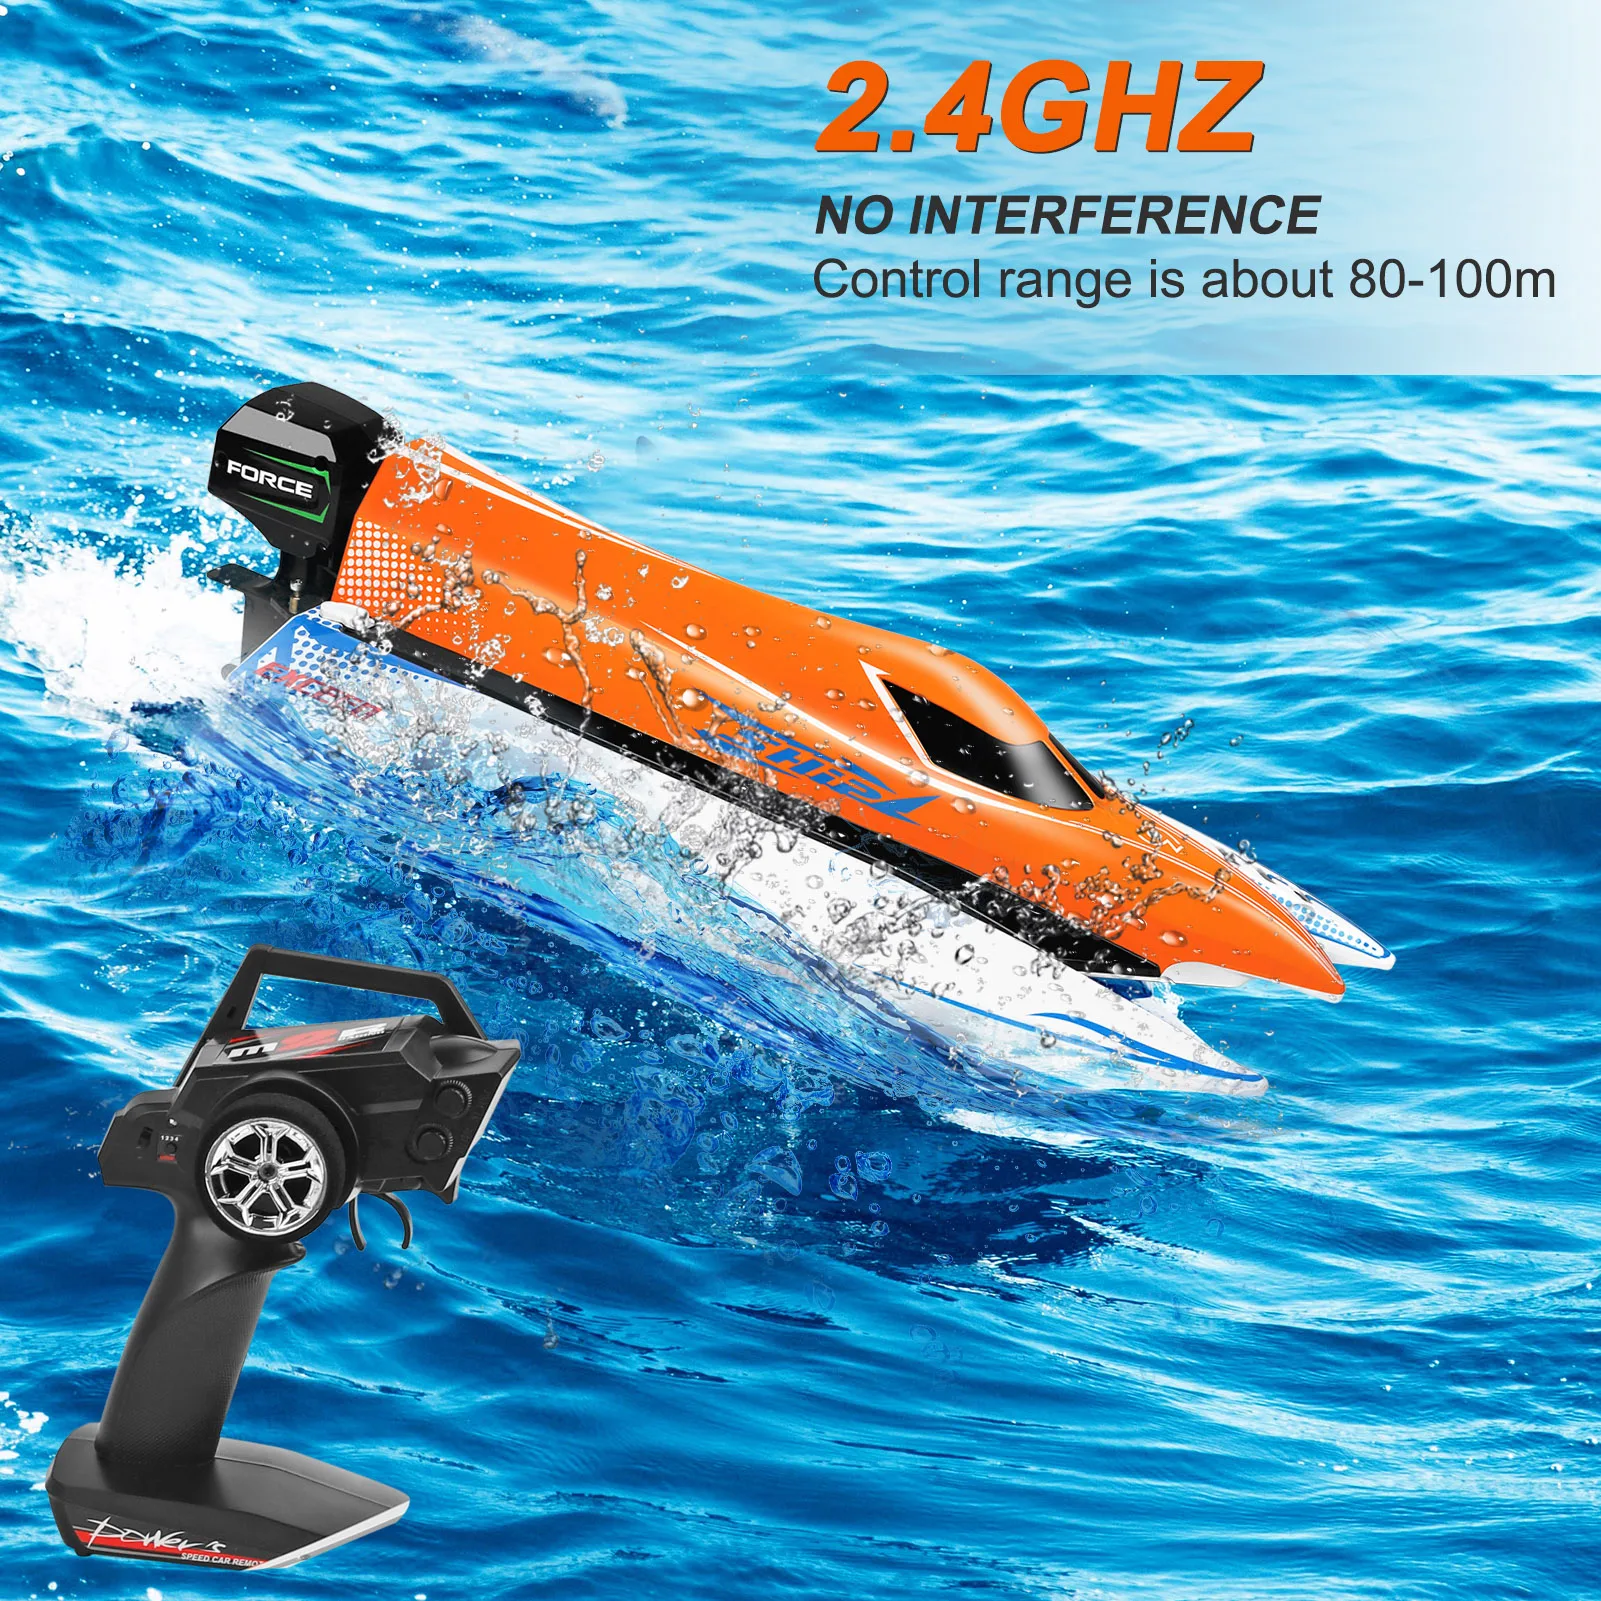 WLtoys WL915-A Boat Remote Control Boats 2.4G 45km/h High Speed RC Boat RC Toy Gift for Kids Adults Boys Girls